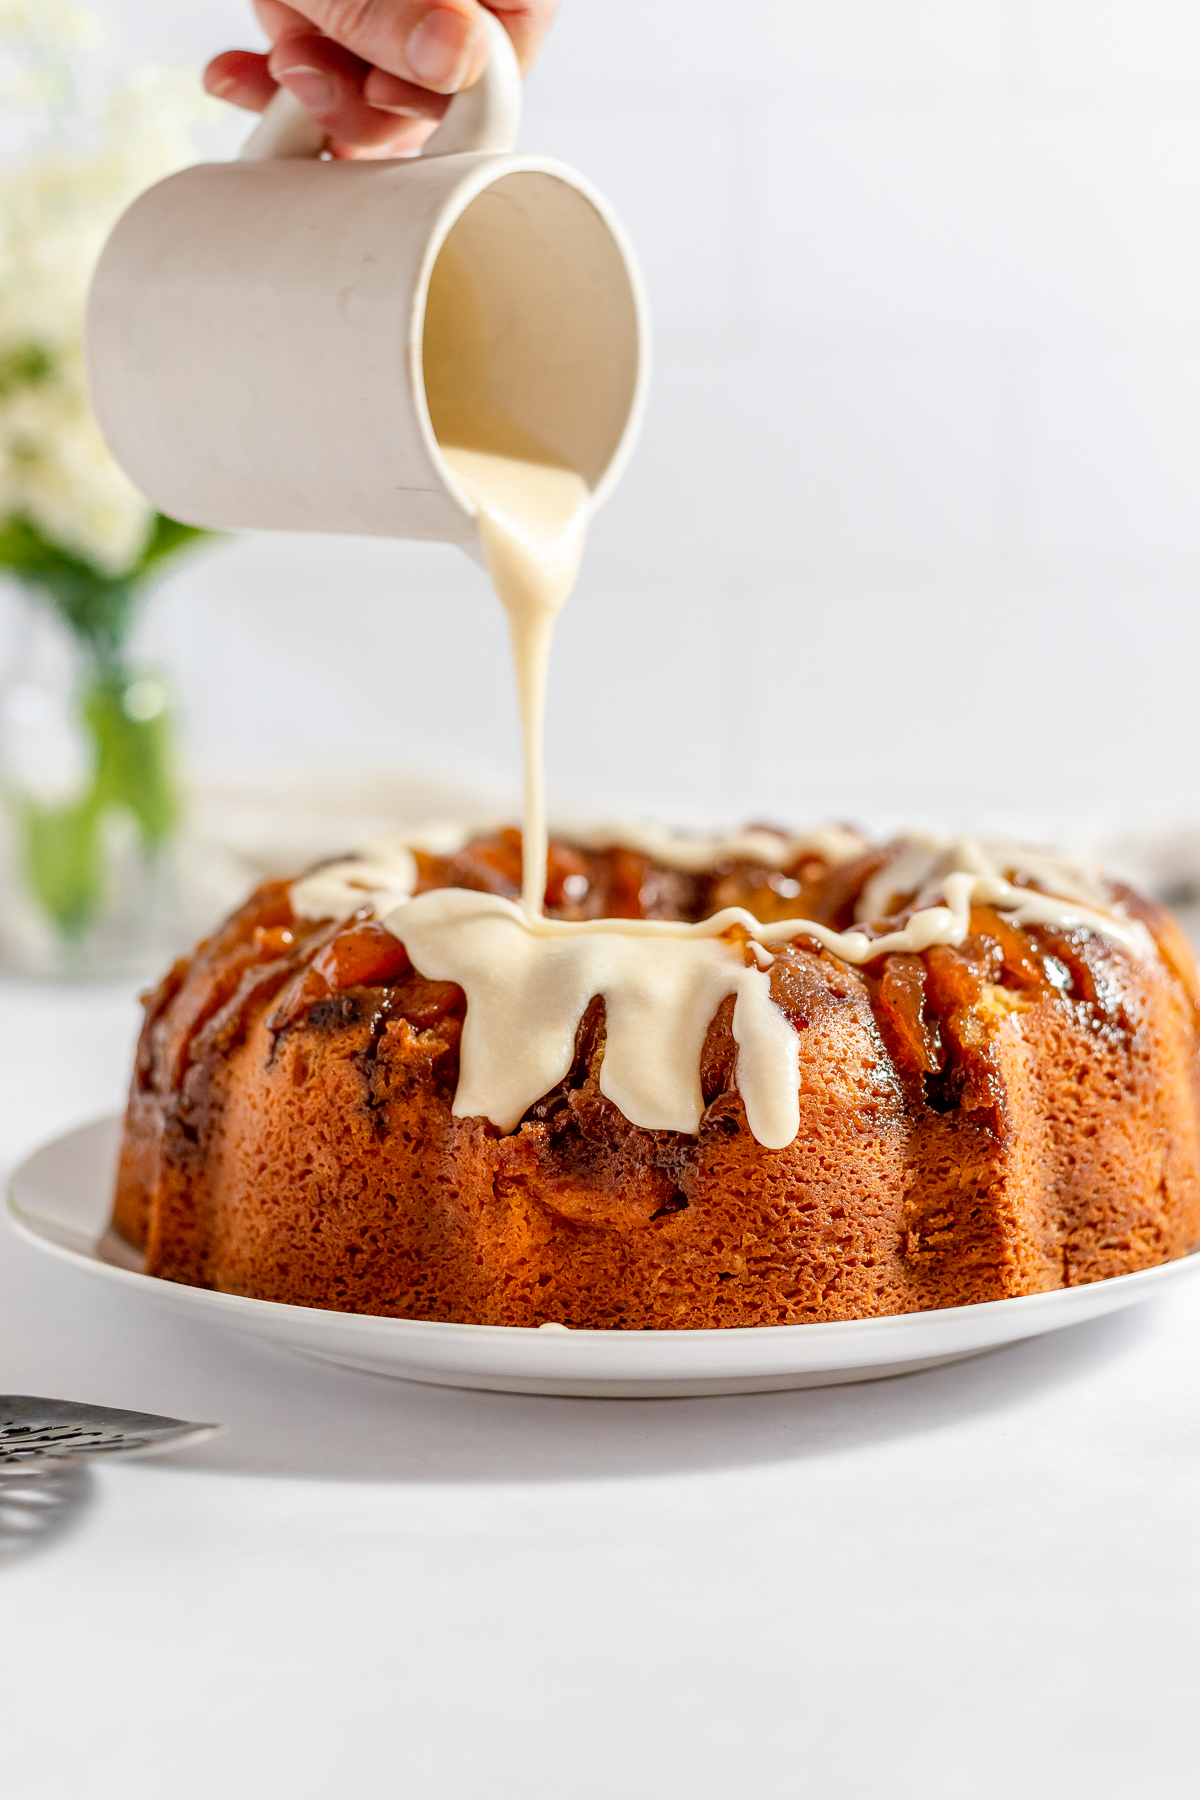 A light brown bundt cake with creamy icing being drizzled over the top.